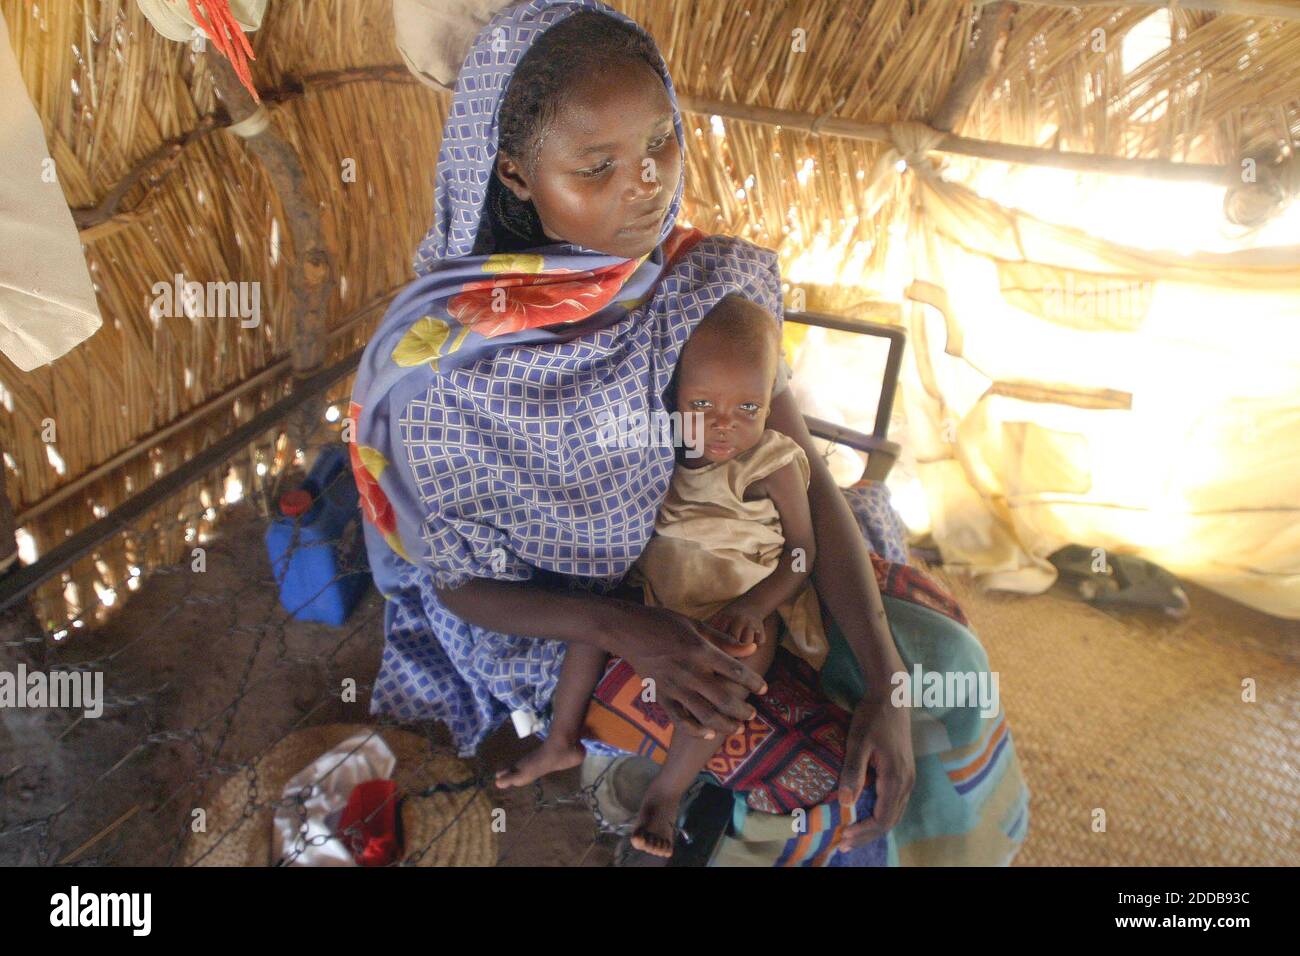 NO FILM, NO VIDEO, NO TV, NO DOCUMENTARY - Kaltoma Musa holds her son Anas at a the Kalma refugee camp in the Darfur region of Sudan on July 17, 2004. Anas' twin sister, Enas Abbakr, died the night before from severe malnourishment. Photo by Evelyn Hockstein/KRT/ABACA. Stock Photo